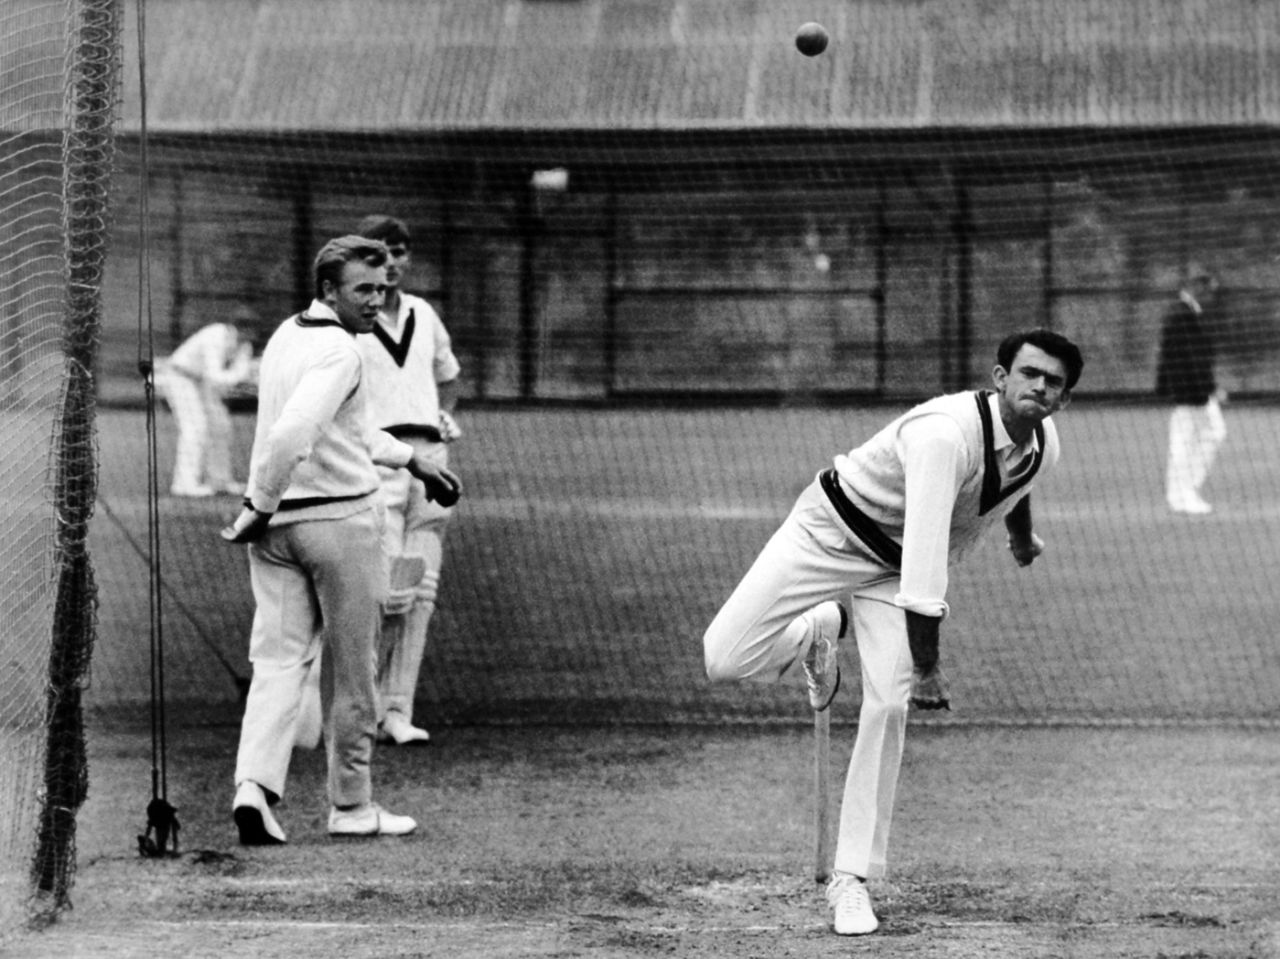 John Gleeson bowls in the nets at Lord's, June 19, 1968